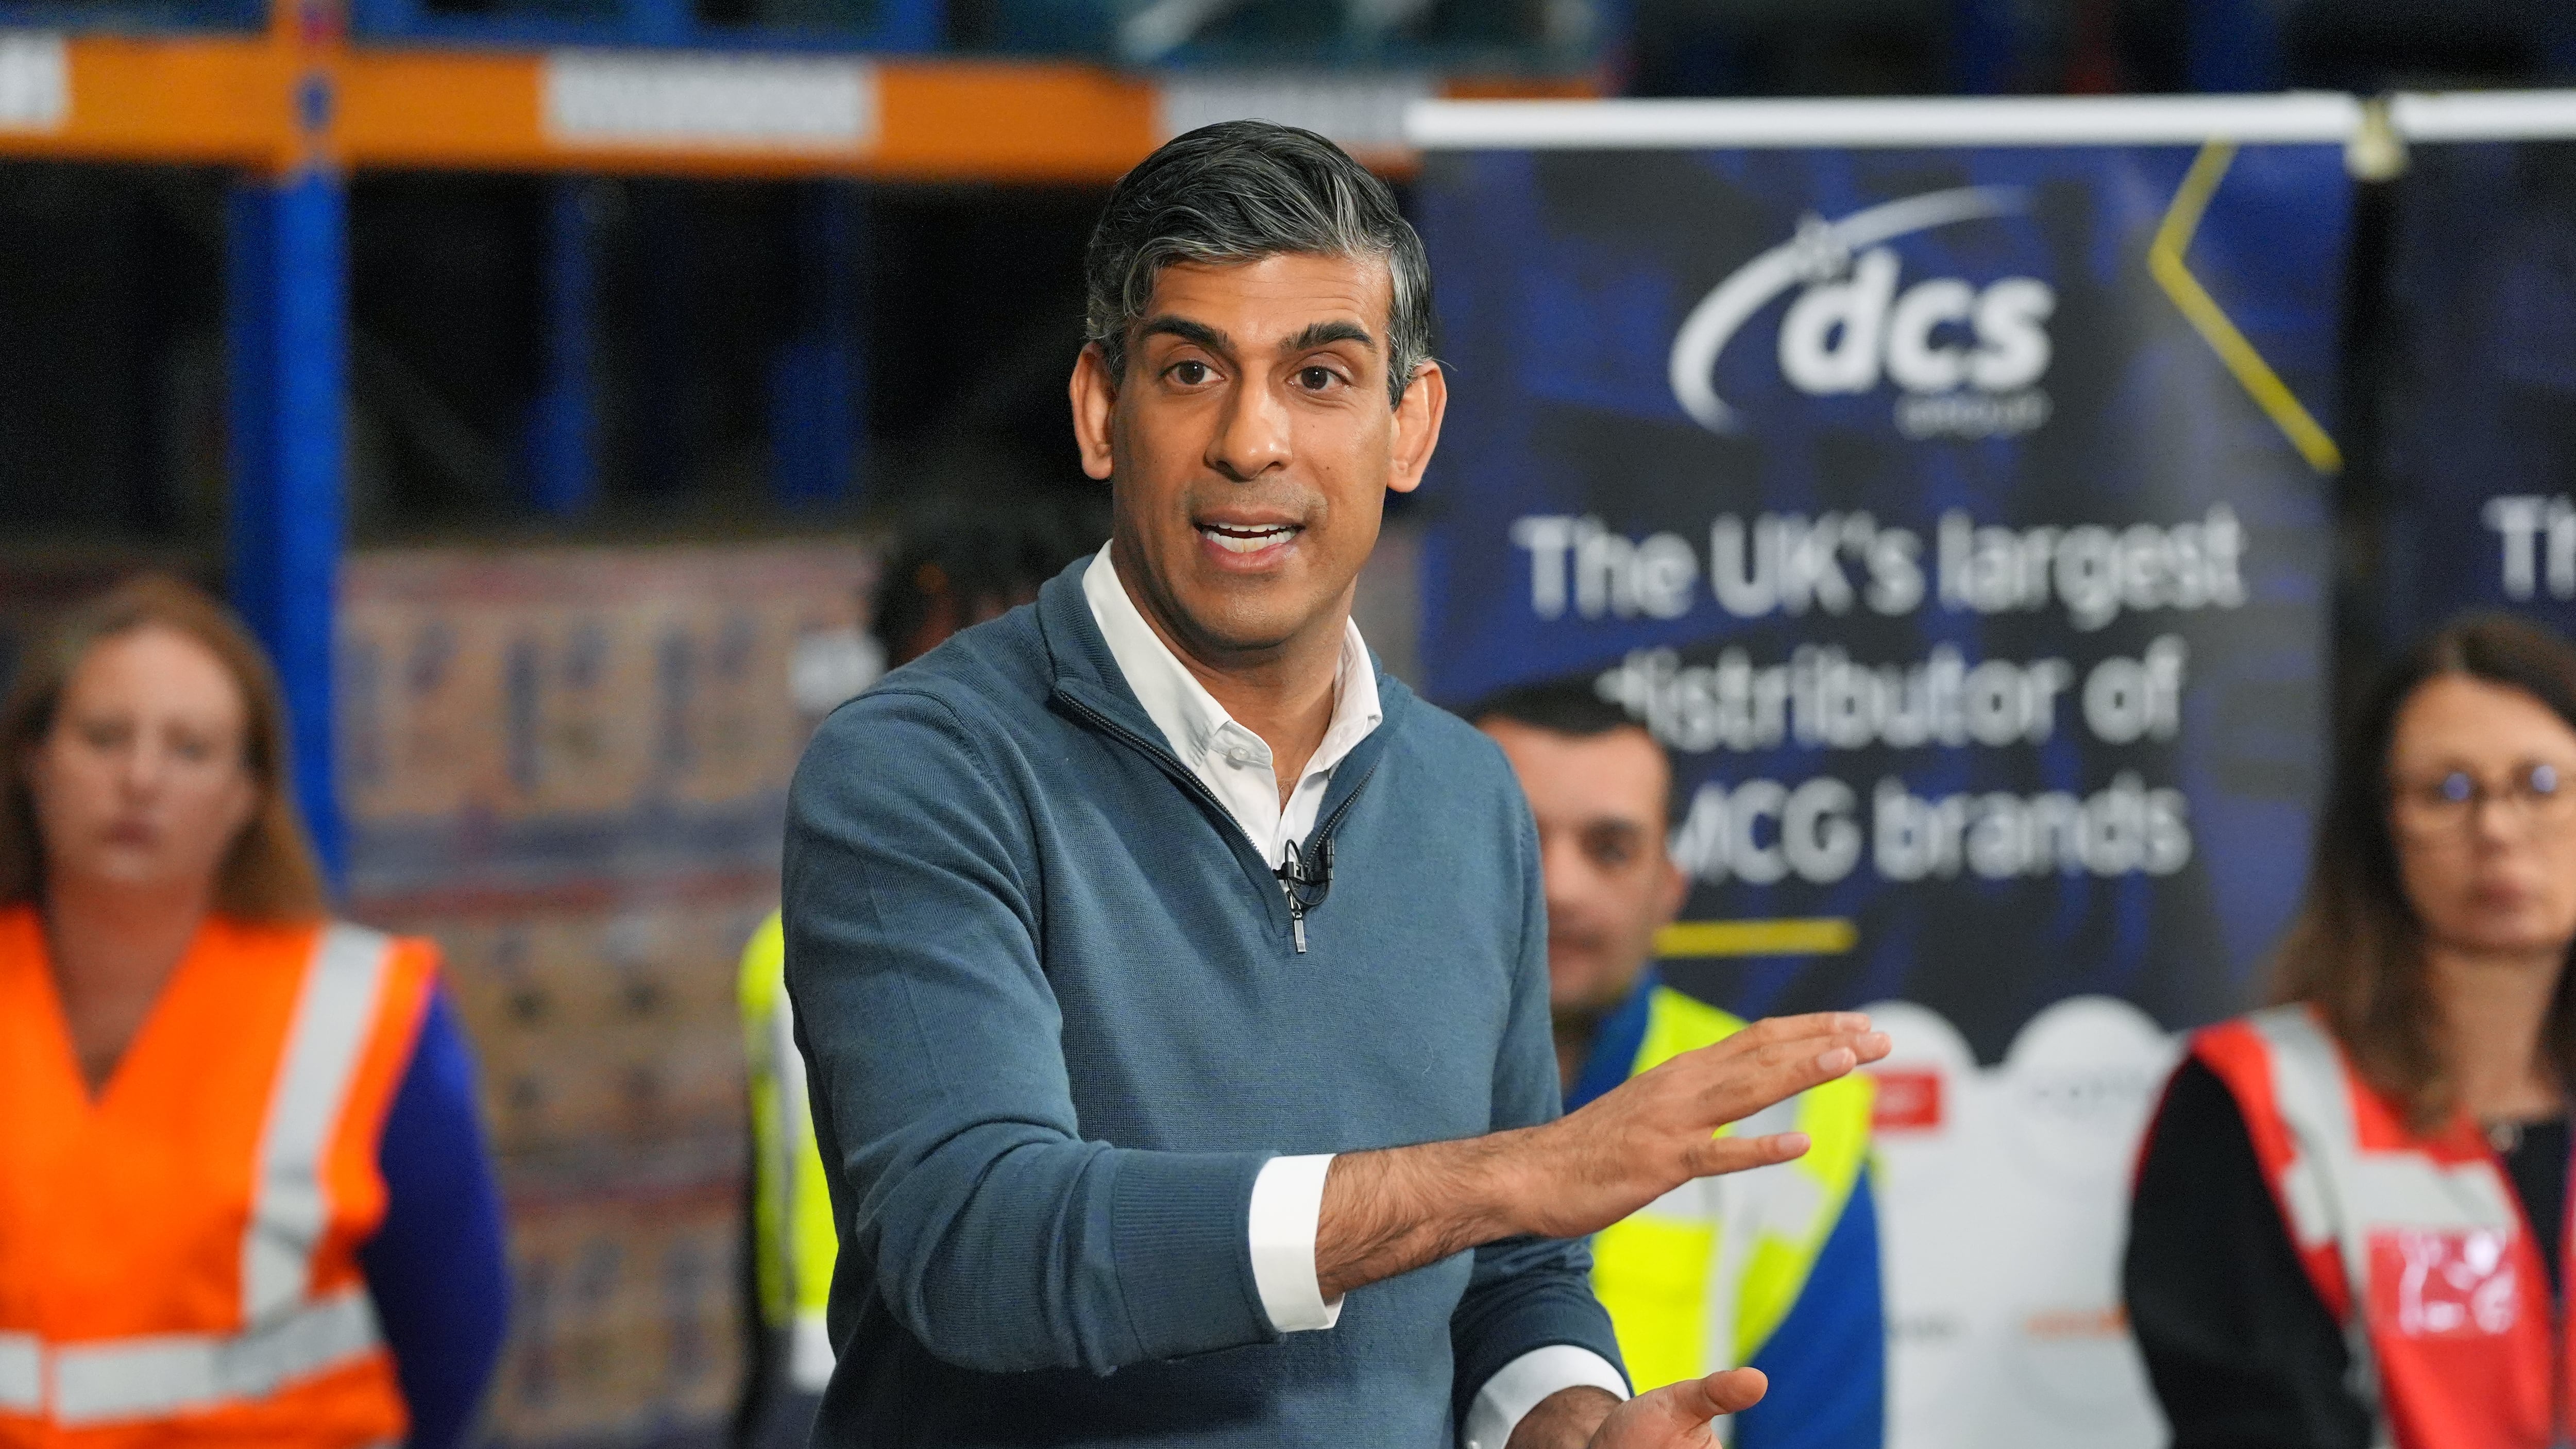 What Rishi Sunak’s repeated blue jumper says about his policies